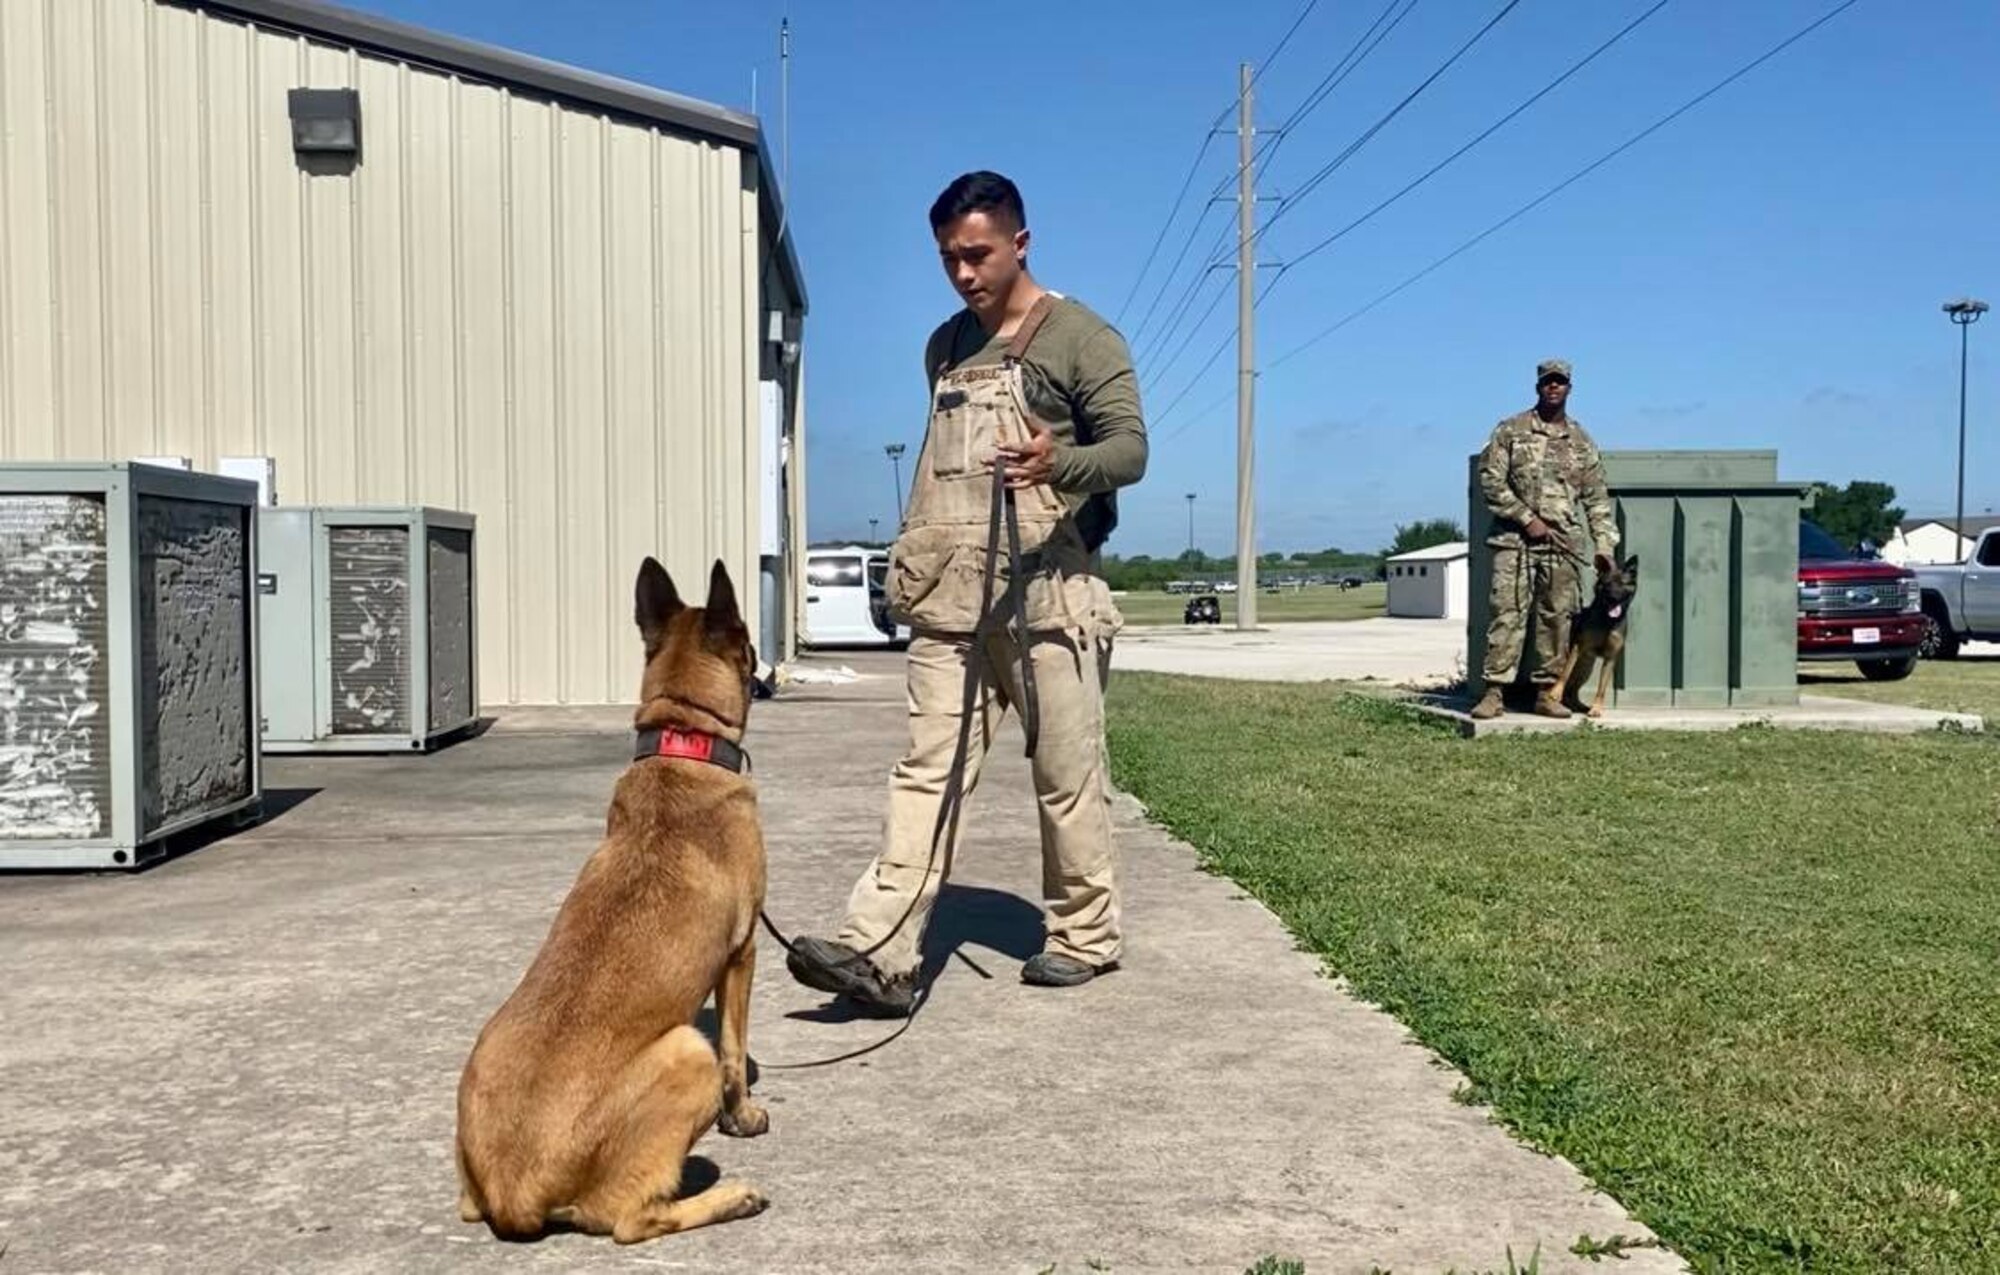 The 341st Training Squadron conducts all military working dog initial training as well as all MWD handlers courses for the Department of Defense right here at Joint Base San Antonio-Lackland, Texas. This elite team was able to share what they do with a class of 4th grade students from Buda Elementary School during a virtual canine demonstration, May 18, 2020.